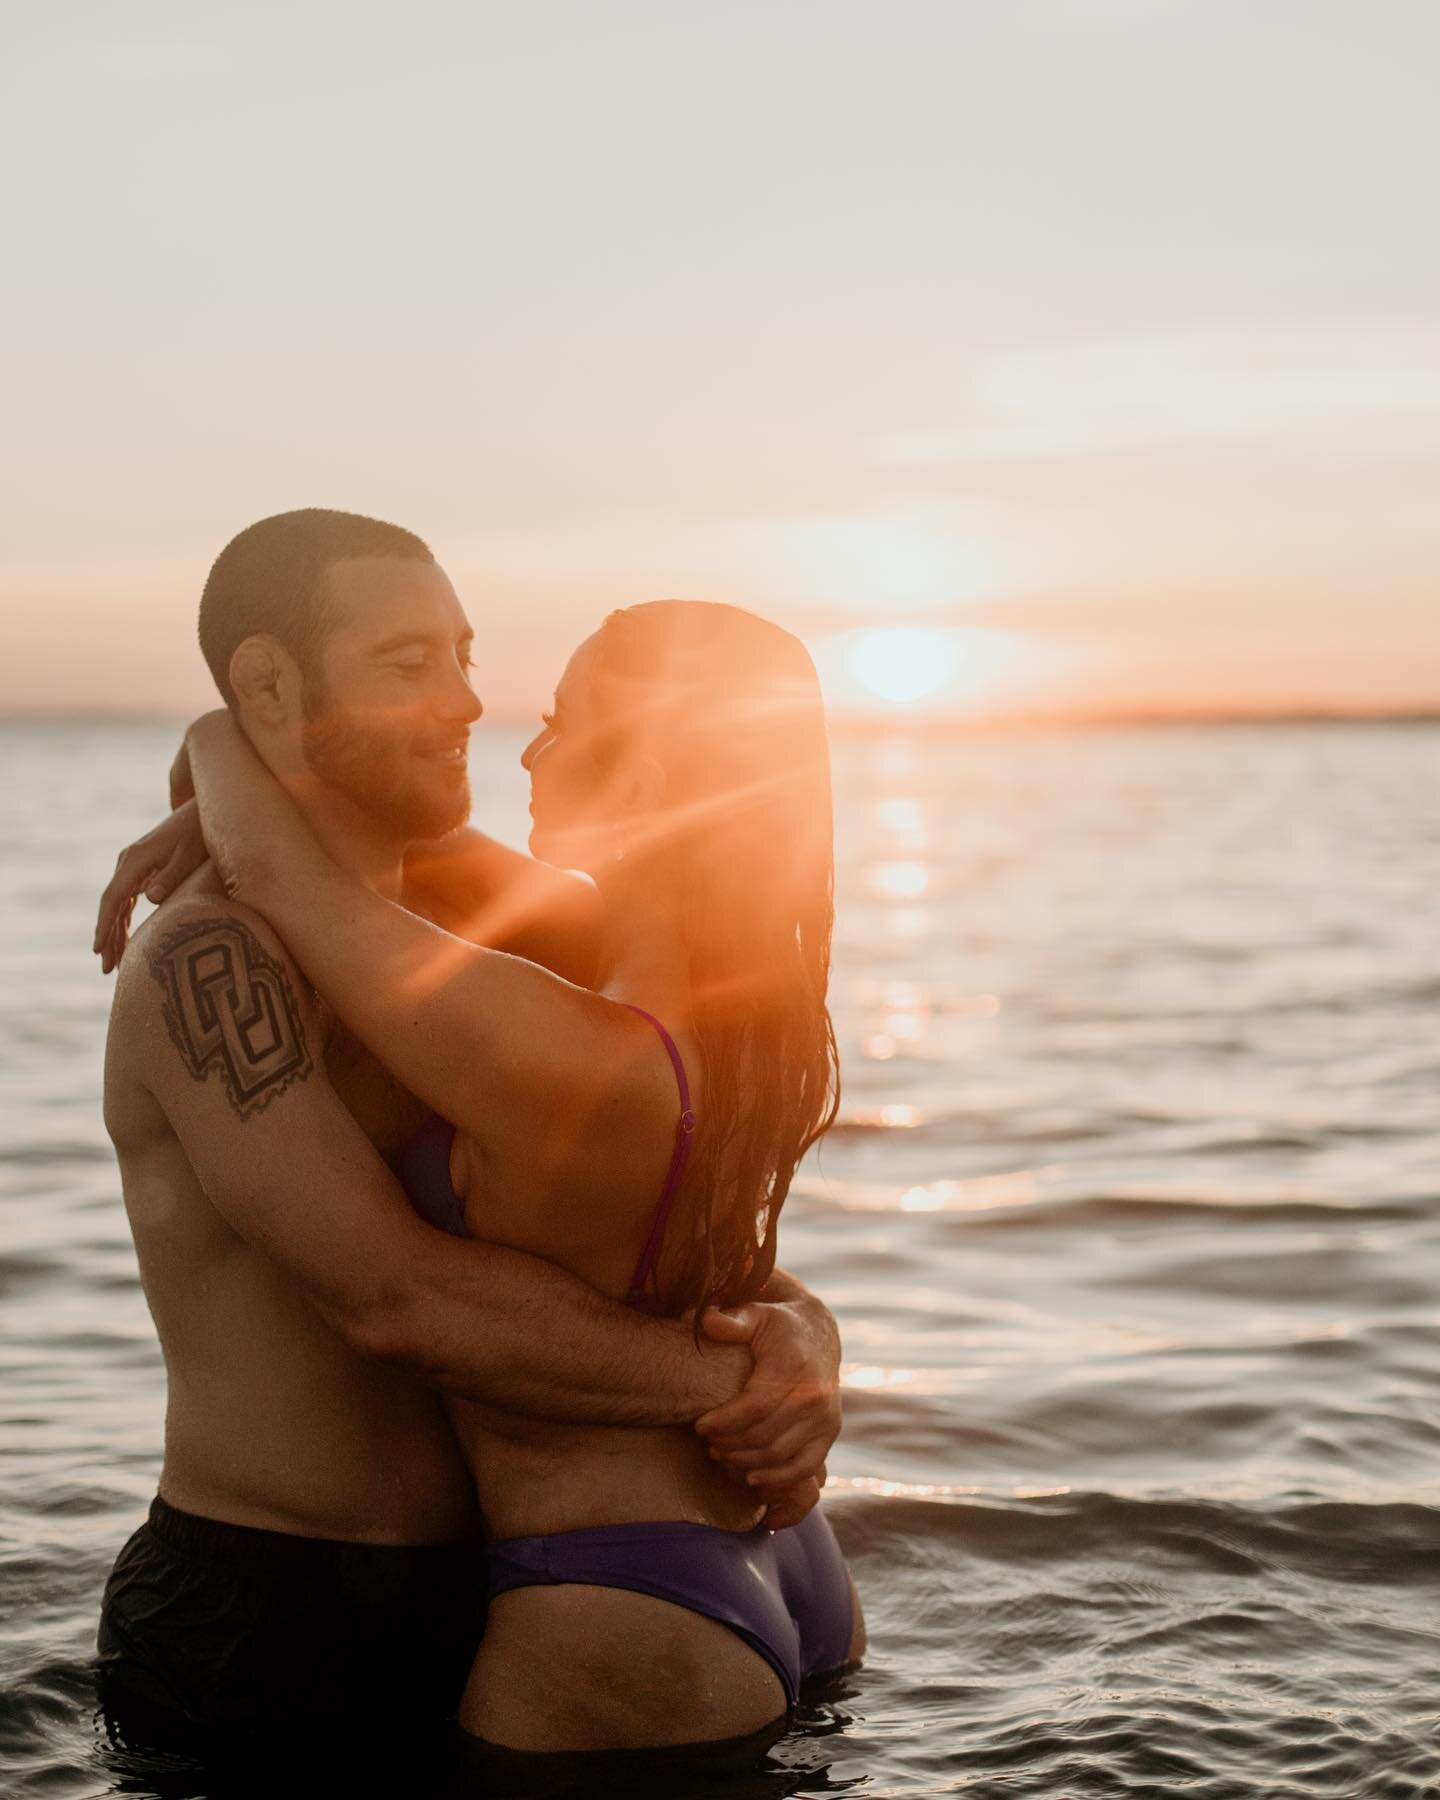 I&rsquo;m just over here waiting for warm weather and late night sunsets😭

Is it summer yet?!
.
.
.
#connecticutphotographer #ctphotographer #ctphotography #ctweddingphotographer #caitlinmaryphotography